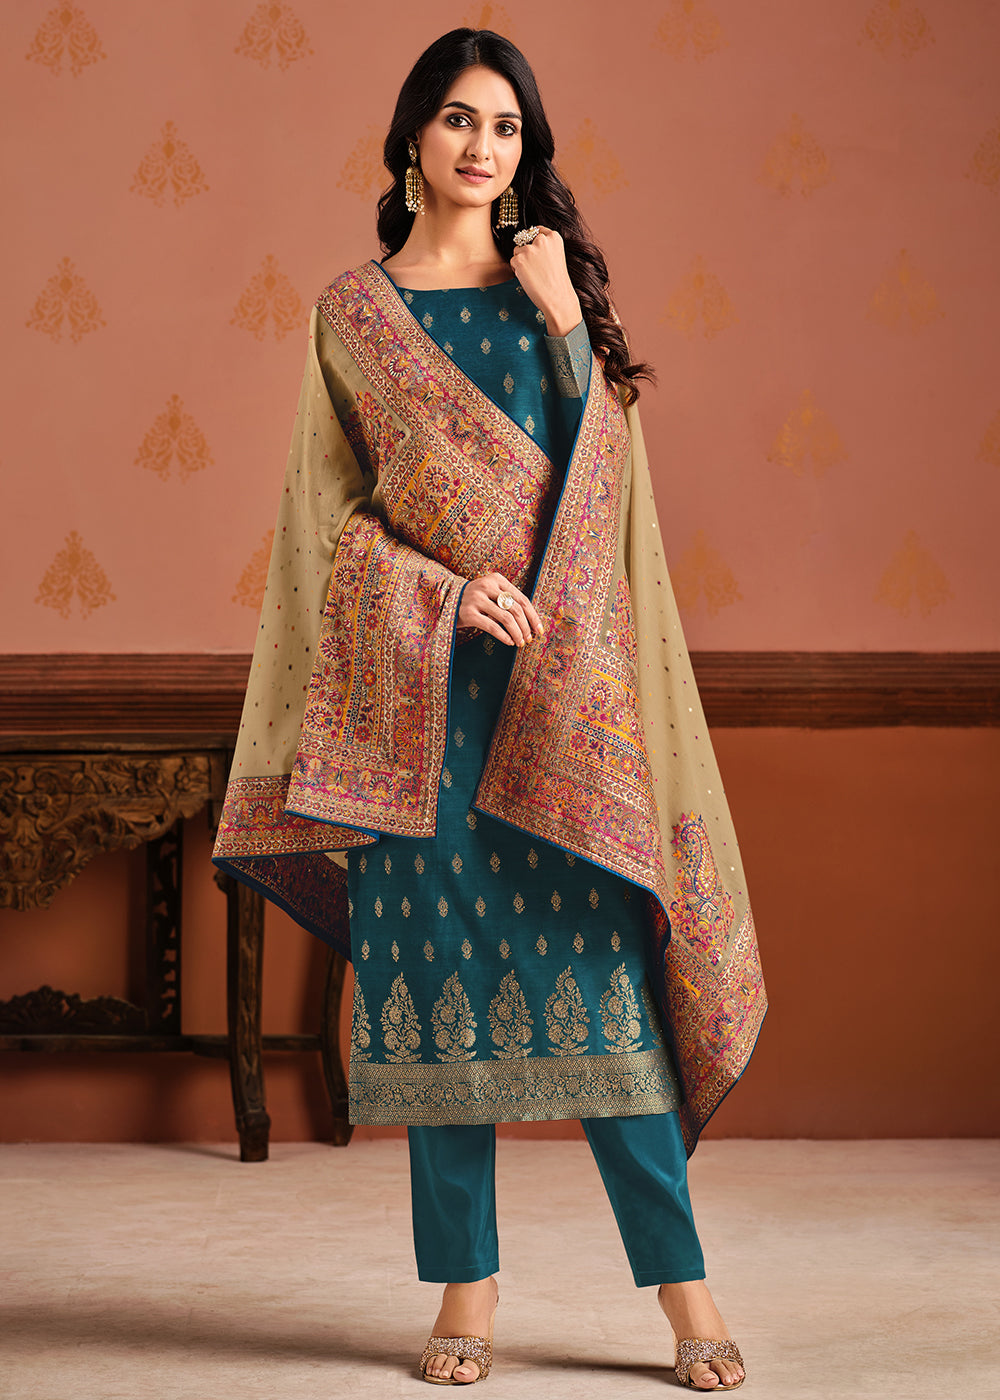 Buy Now Teal & Beige Silk Jacquard Sangeet Wear Pant Style Salwar Suit Online in USA, UK, Canada & Worldwide at Empress Clothing.